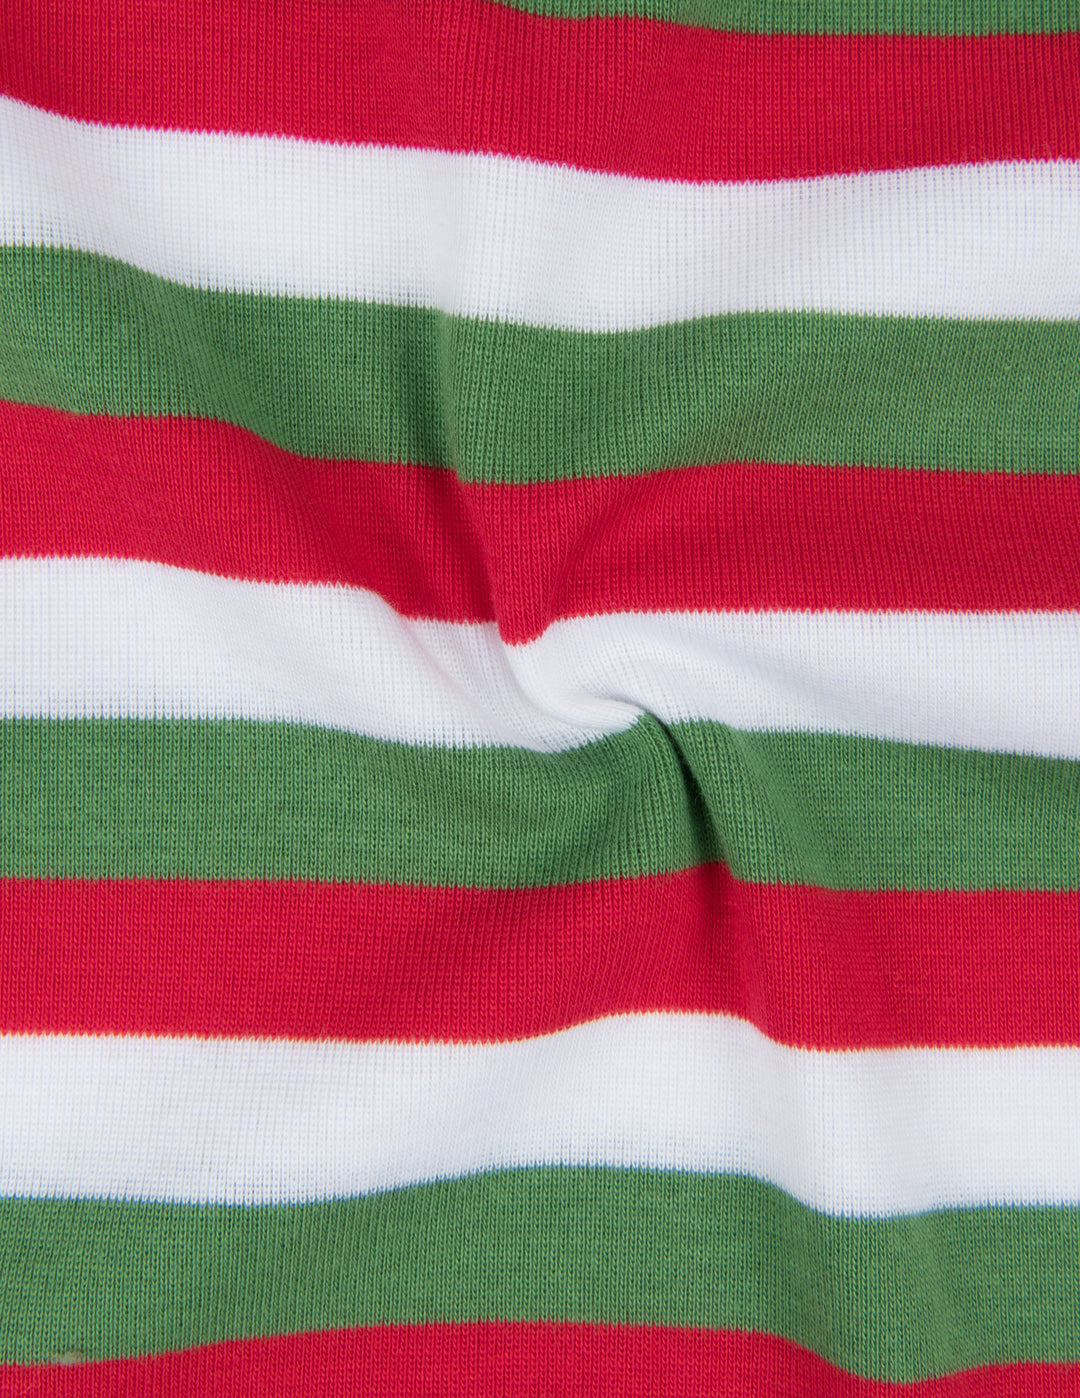 red, green, and white stripes swatch